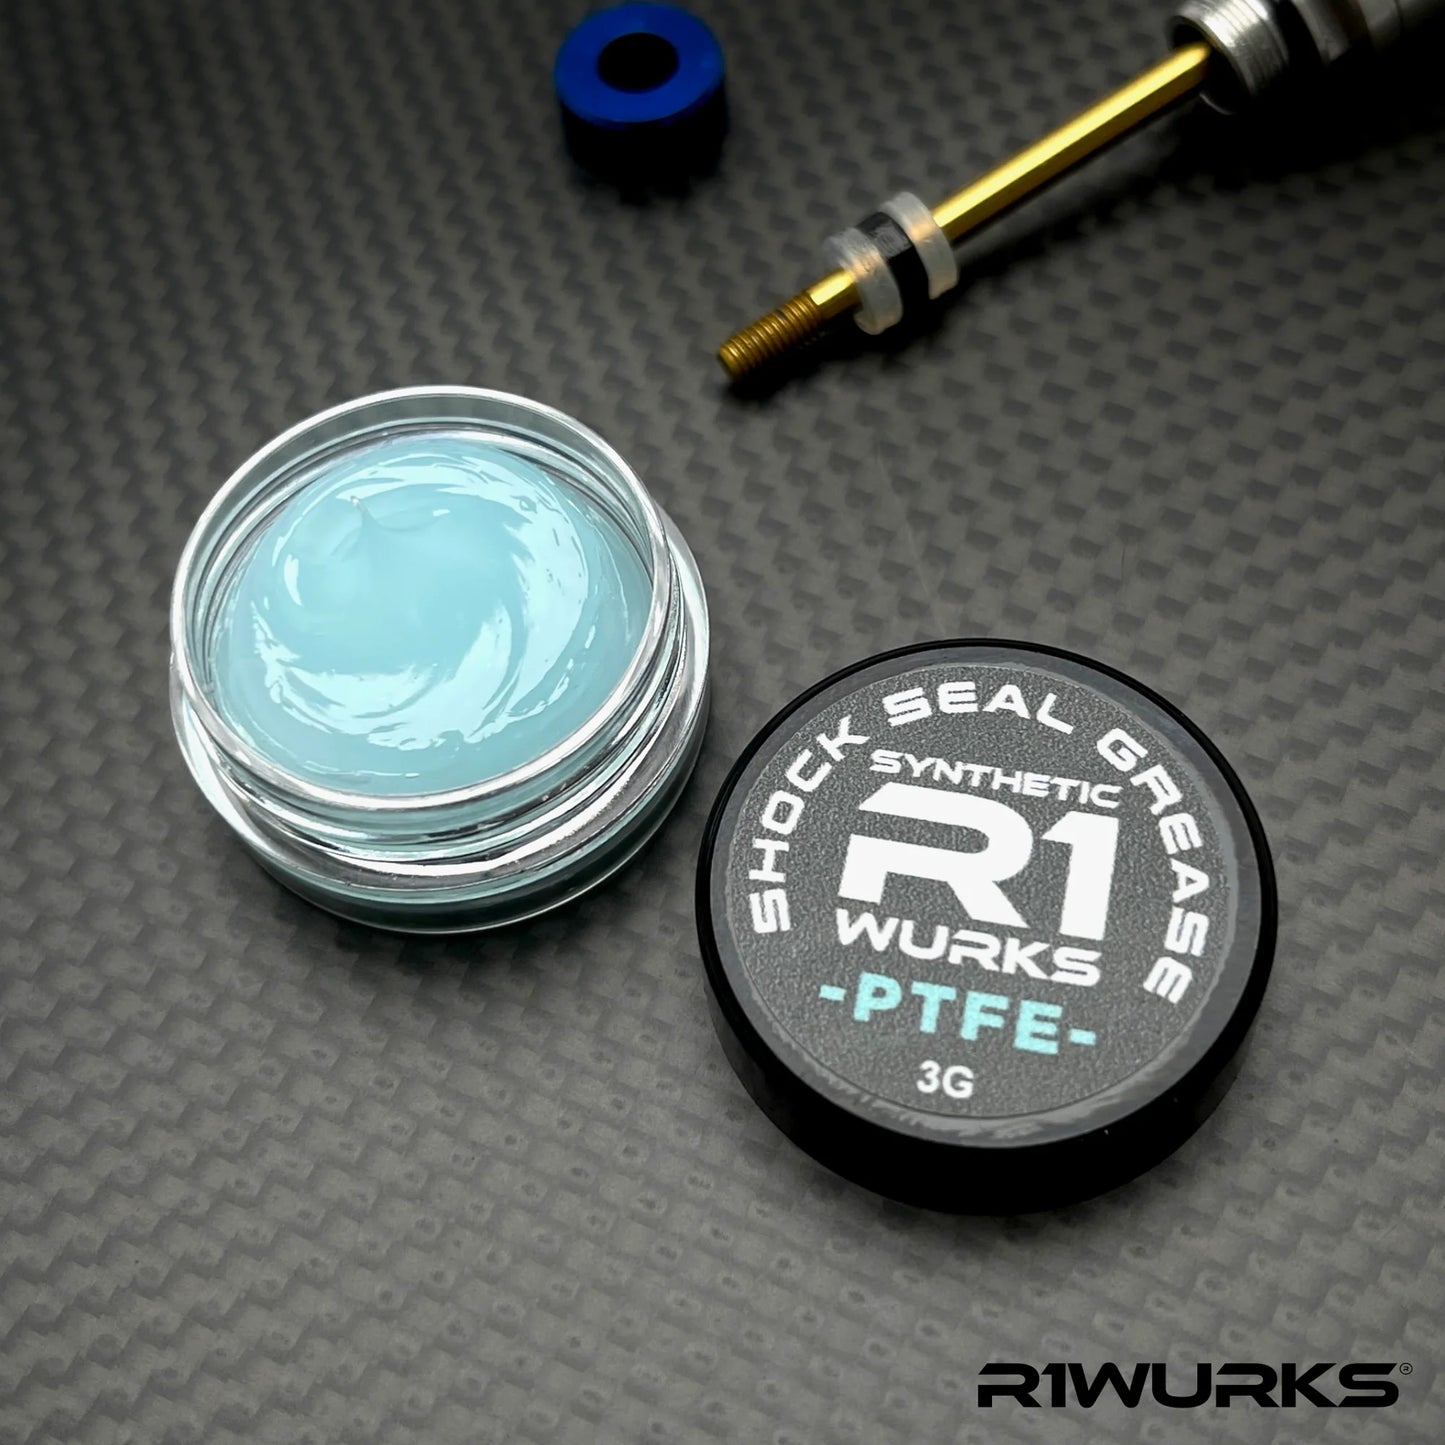 R1 Wurks PTFE Shock Seal Grease, 3g